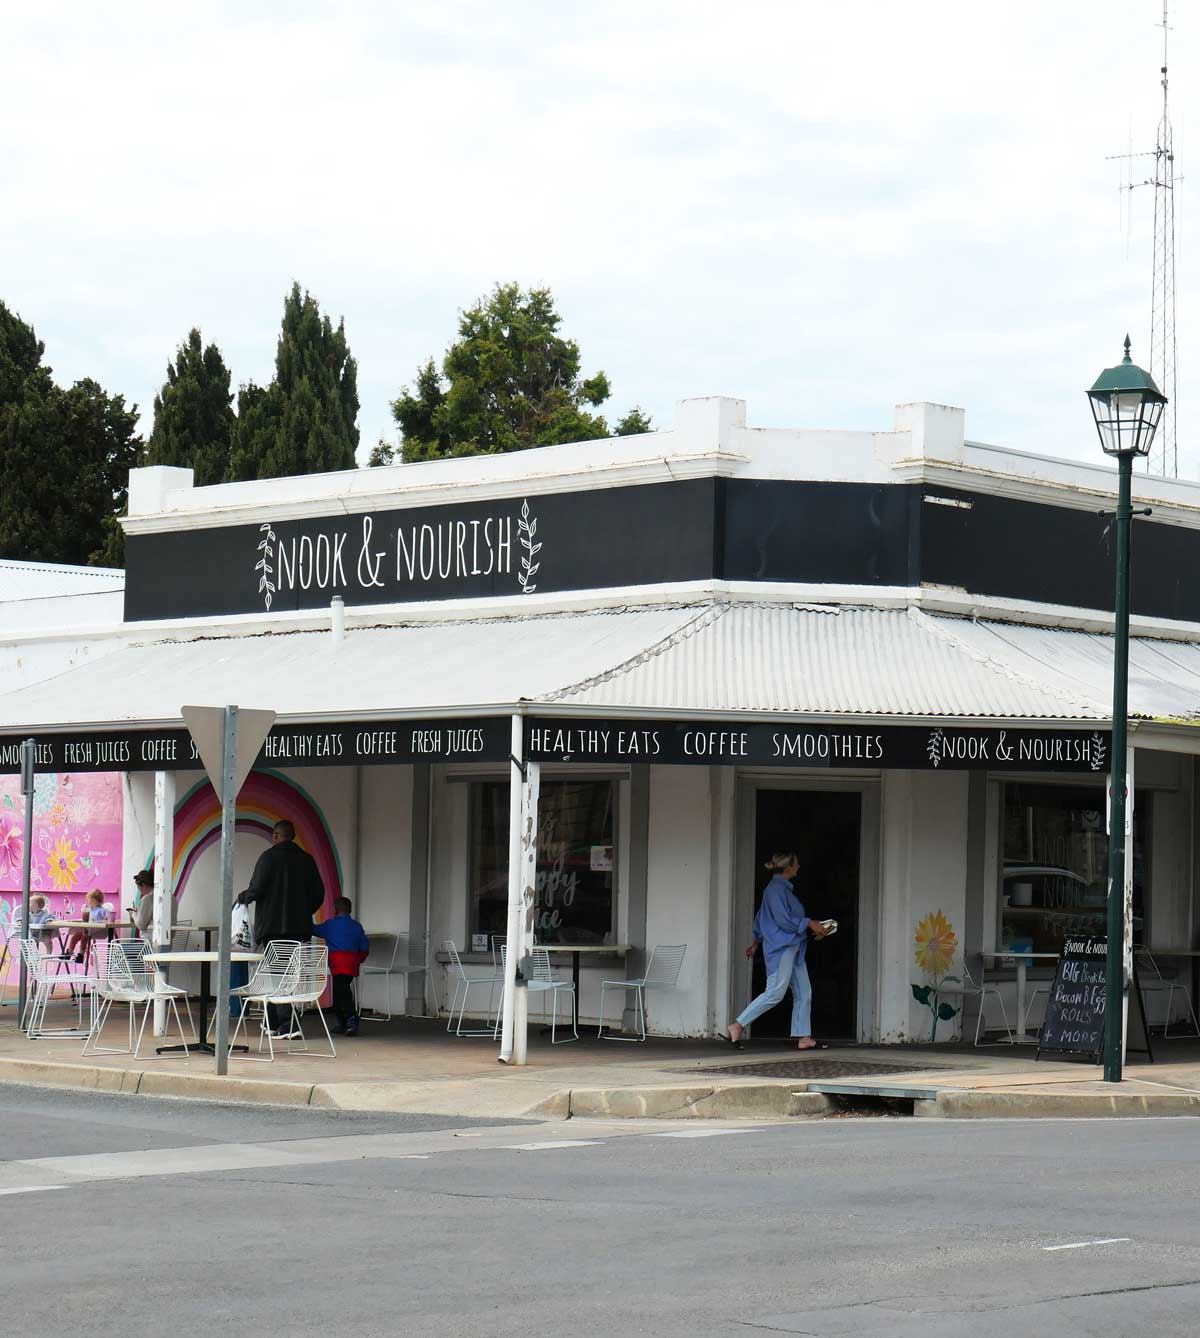 Nook and Nourish along the Moonta main street, another town part of the Copper Coast region in the Upper Yorke Peninsula